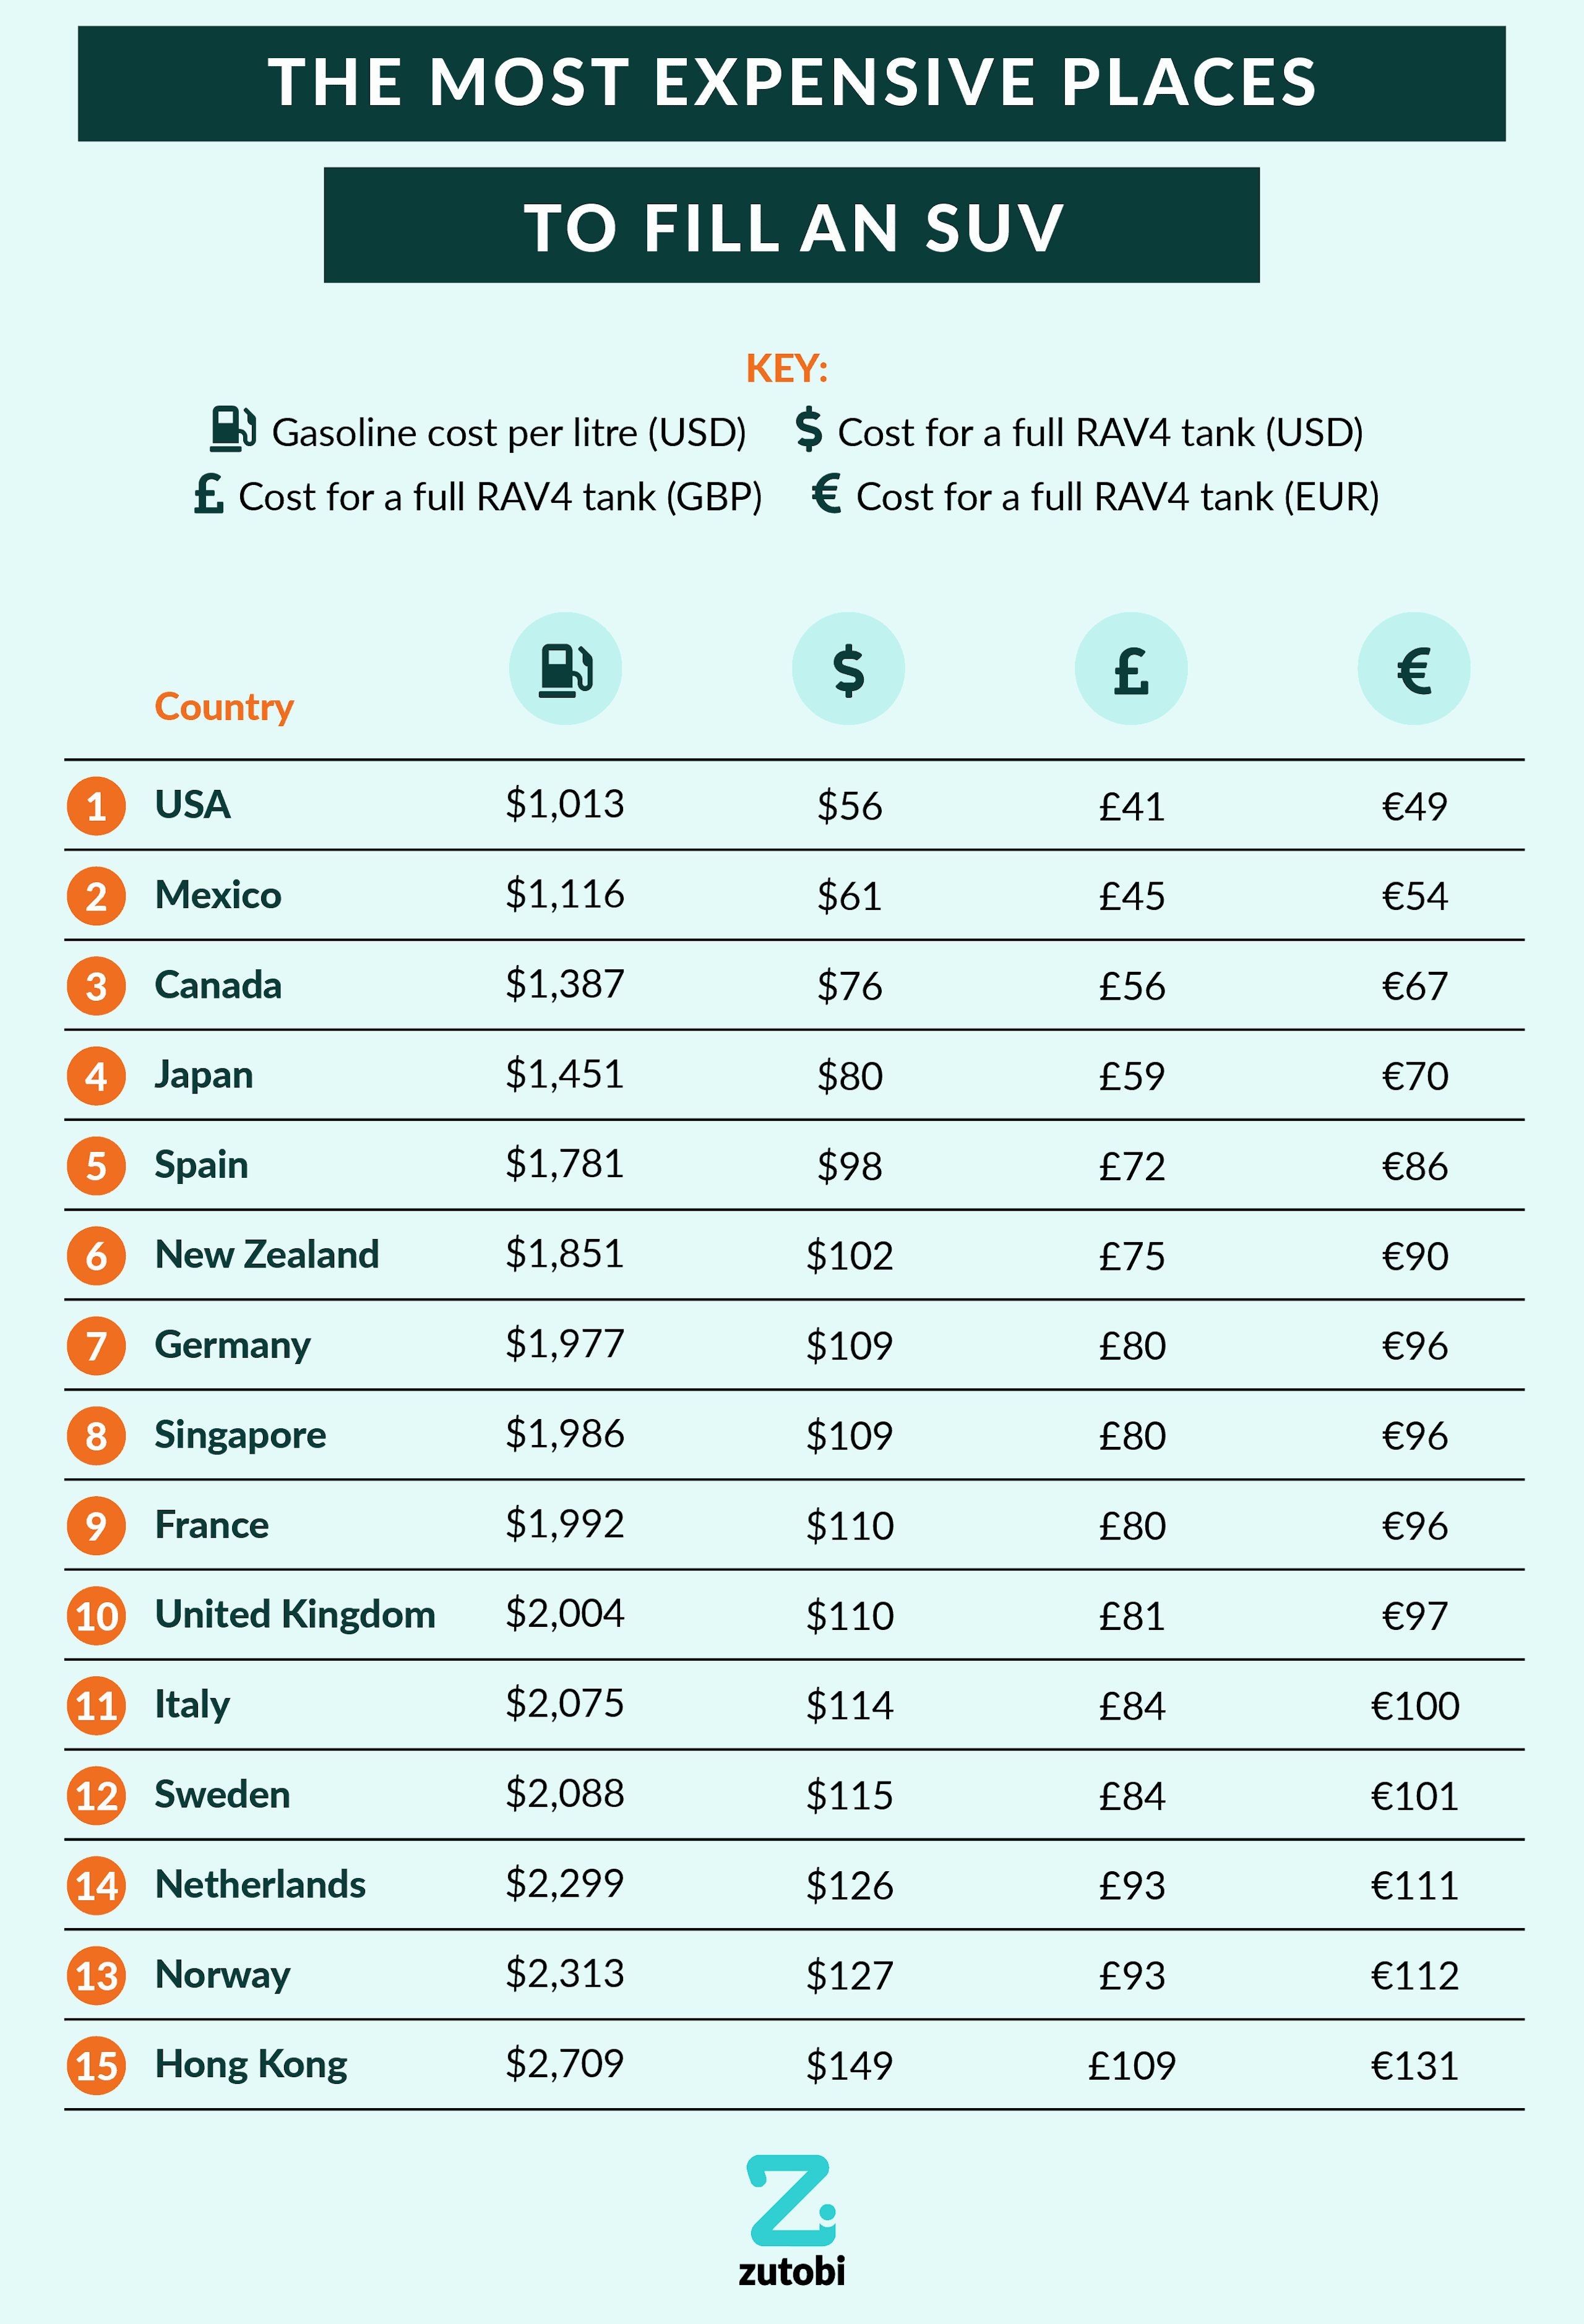 The Most Expensive Places to Fill an SUV